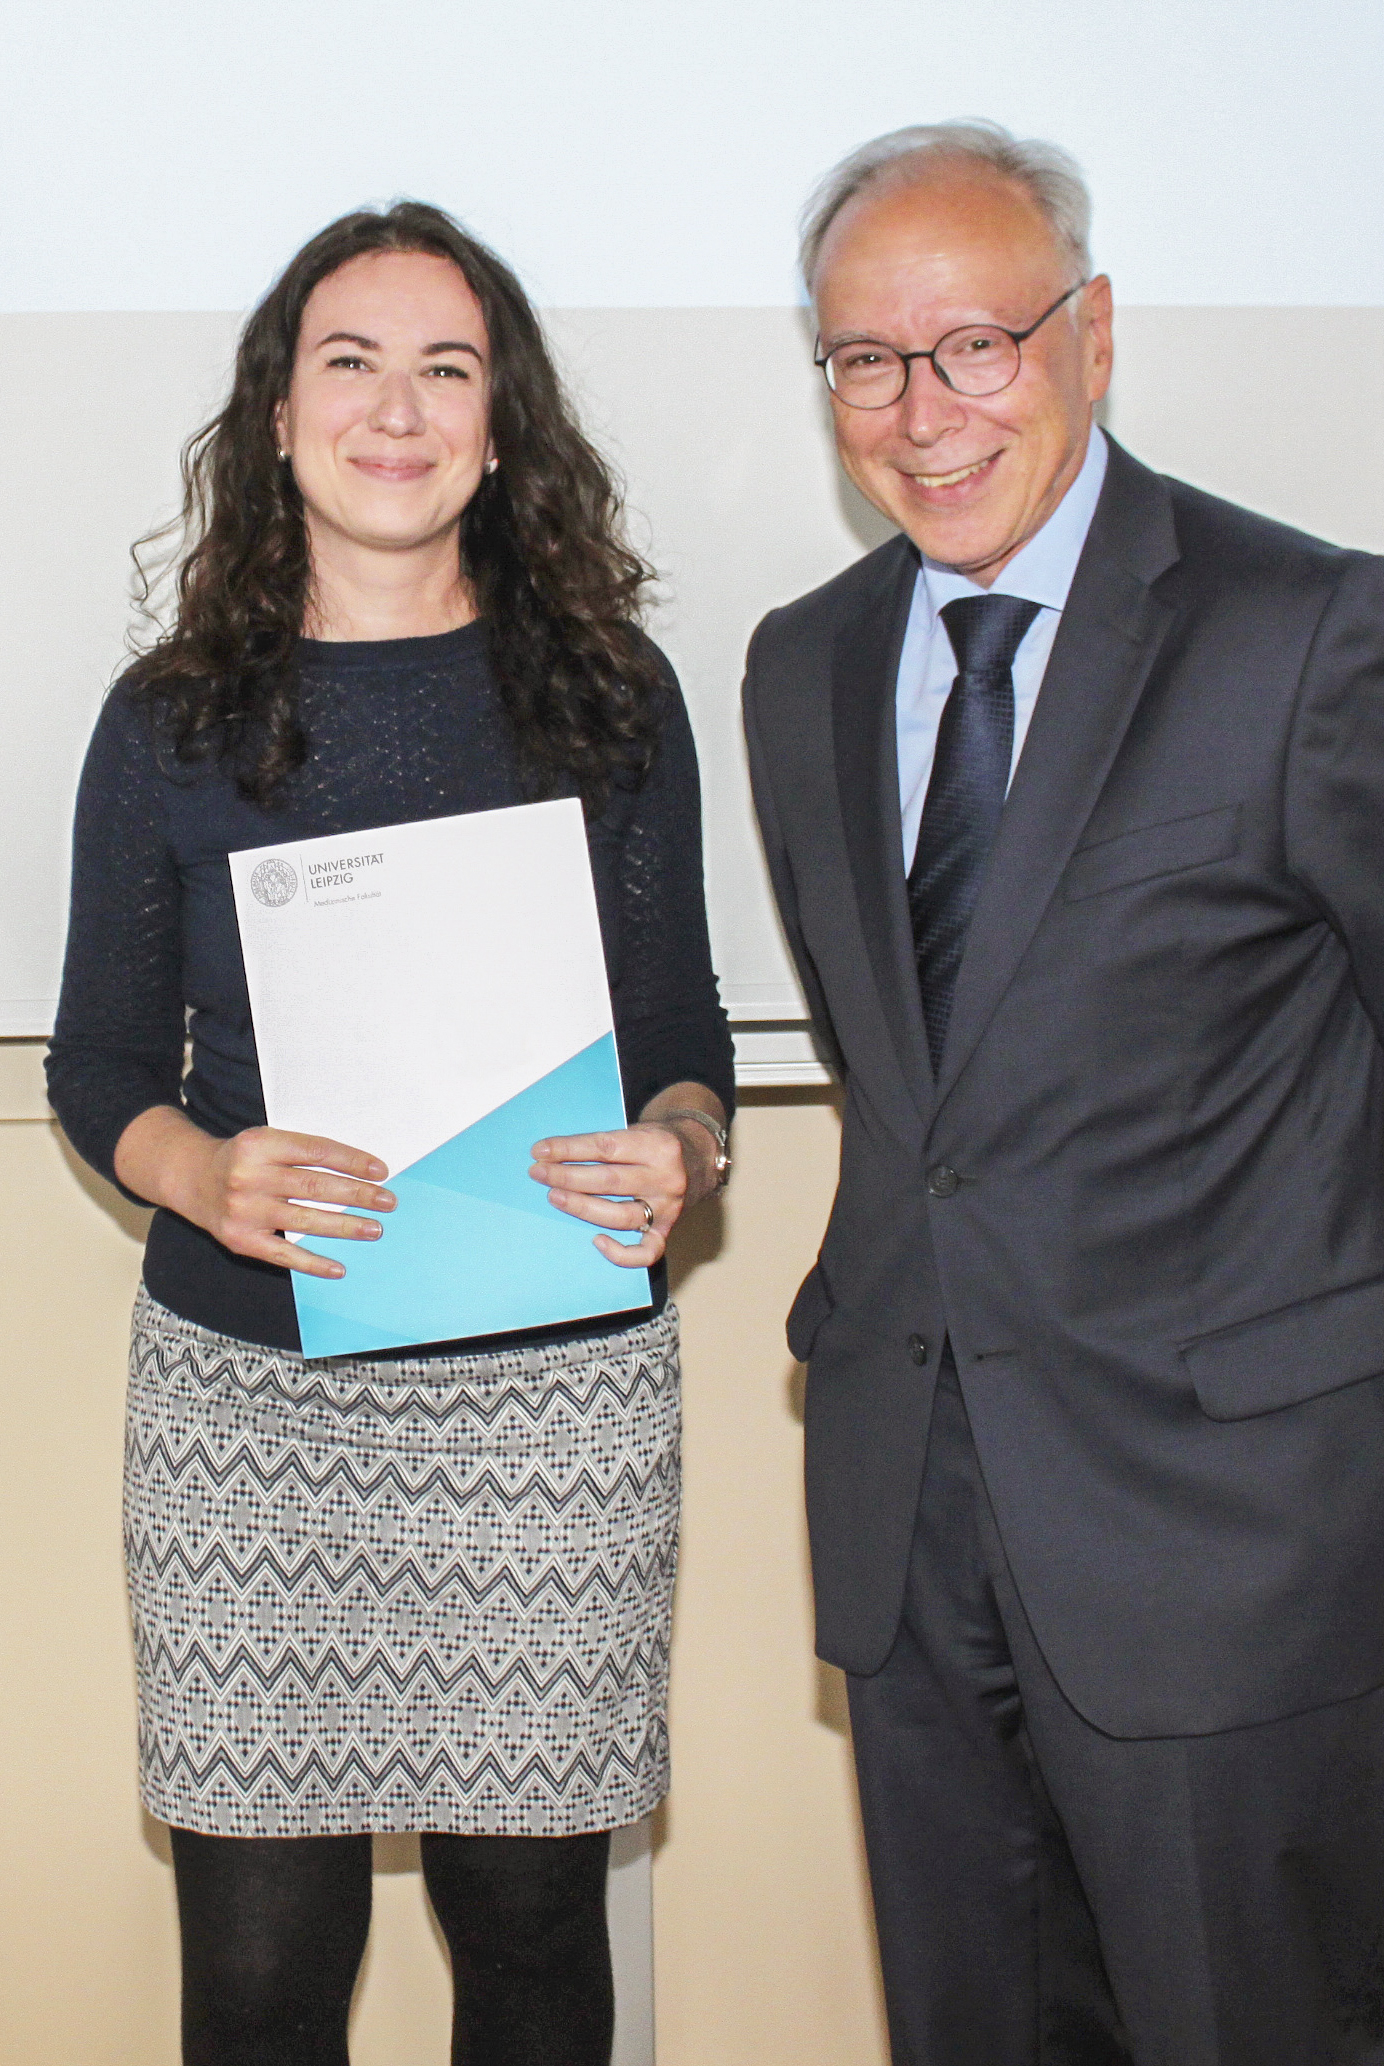 Prof. Dr. Christoph Josten, Dean of Leipzig University’s Faculty of Medicine, presented the PhD prize to Dr. Alexandra Rockstroh